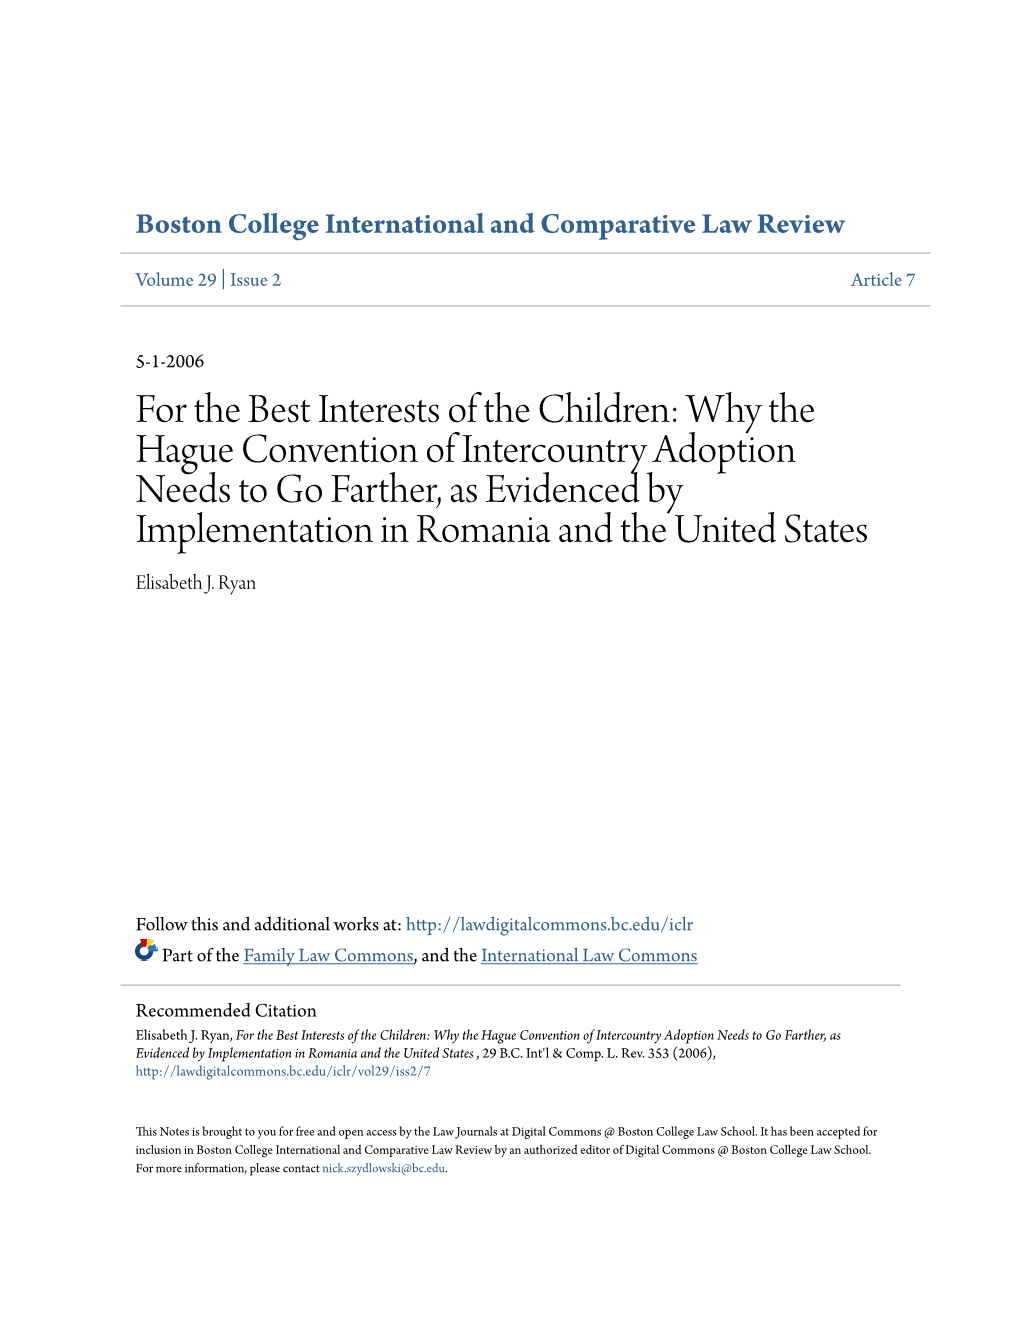 For the Best Interests of the Children: Why the Hague Convention Of